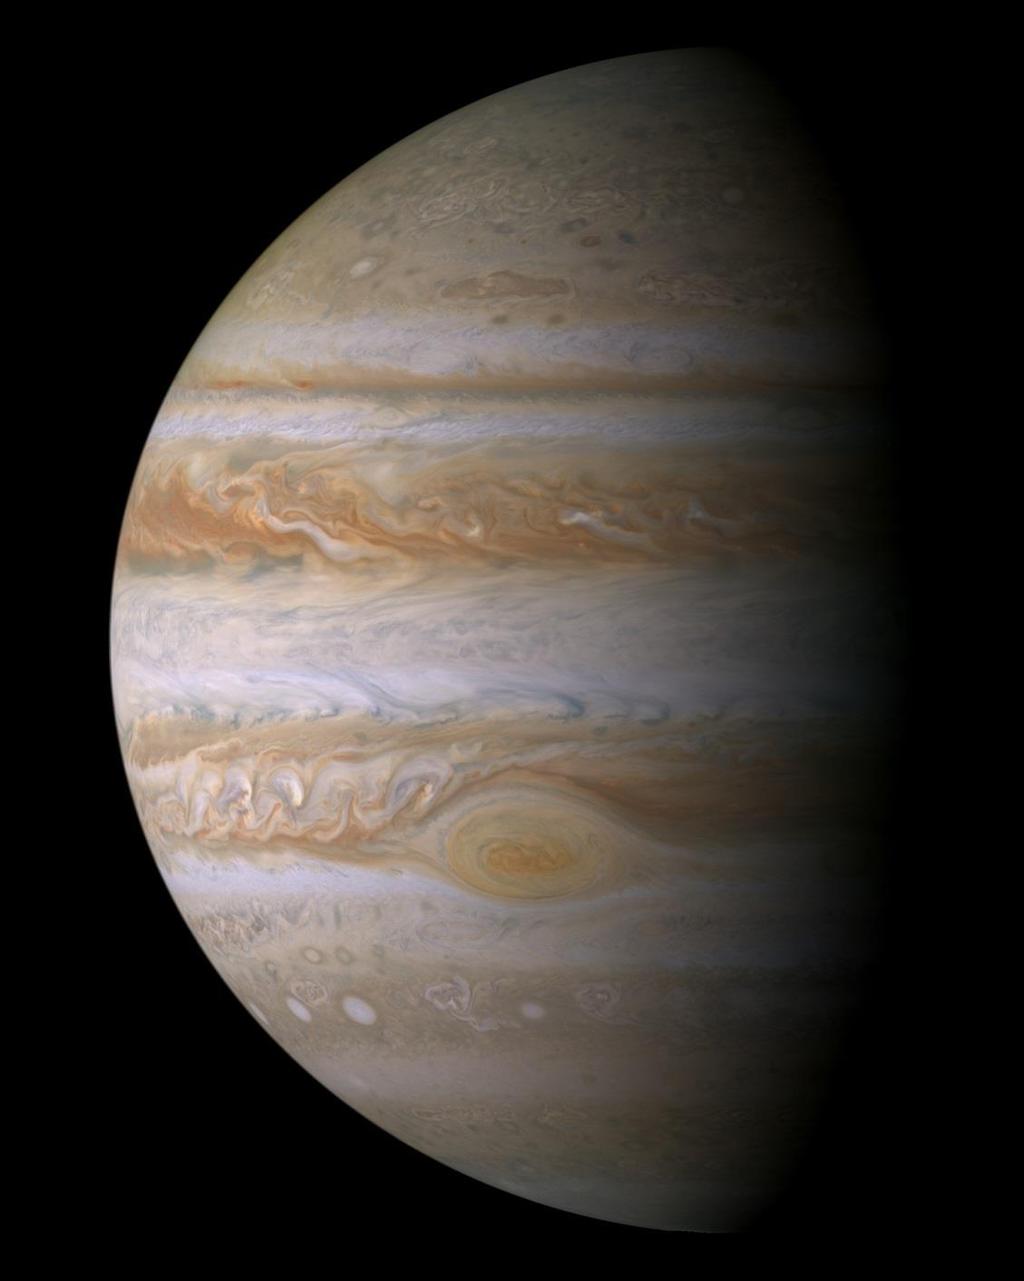 Jupiter Jupiter is a GAS GIANT It is over 300 times more massive than the Earth It is mostly Hydrogen gas.